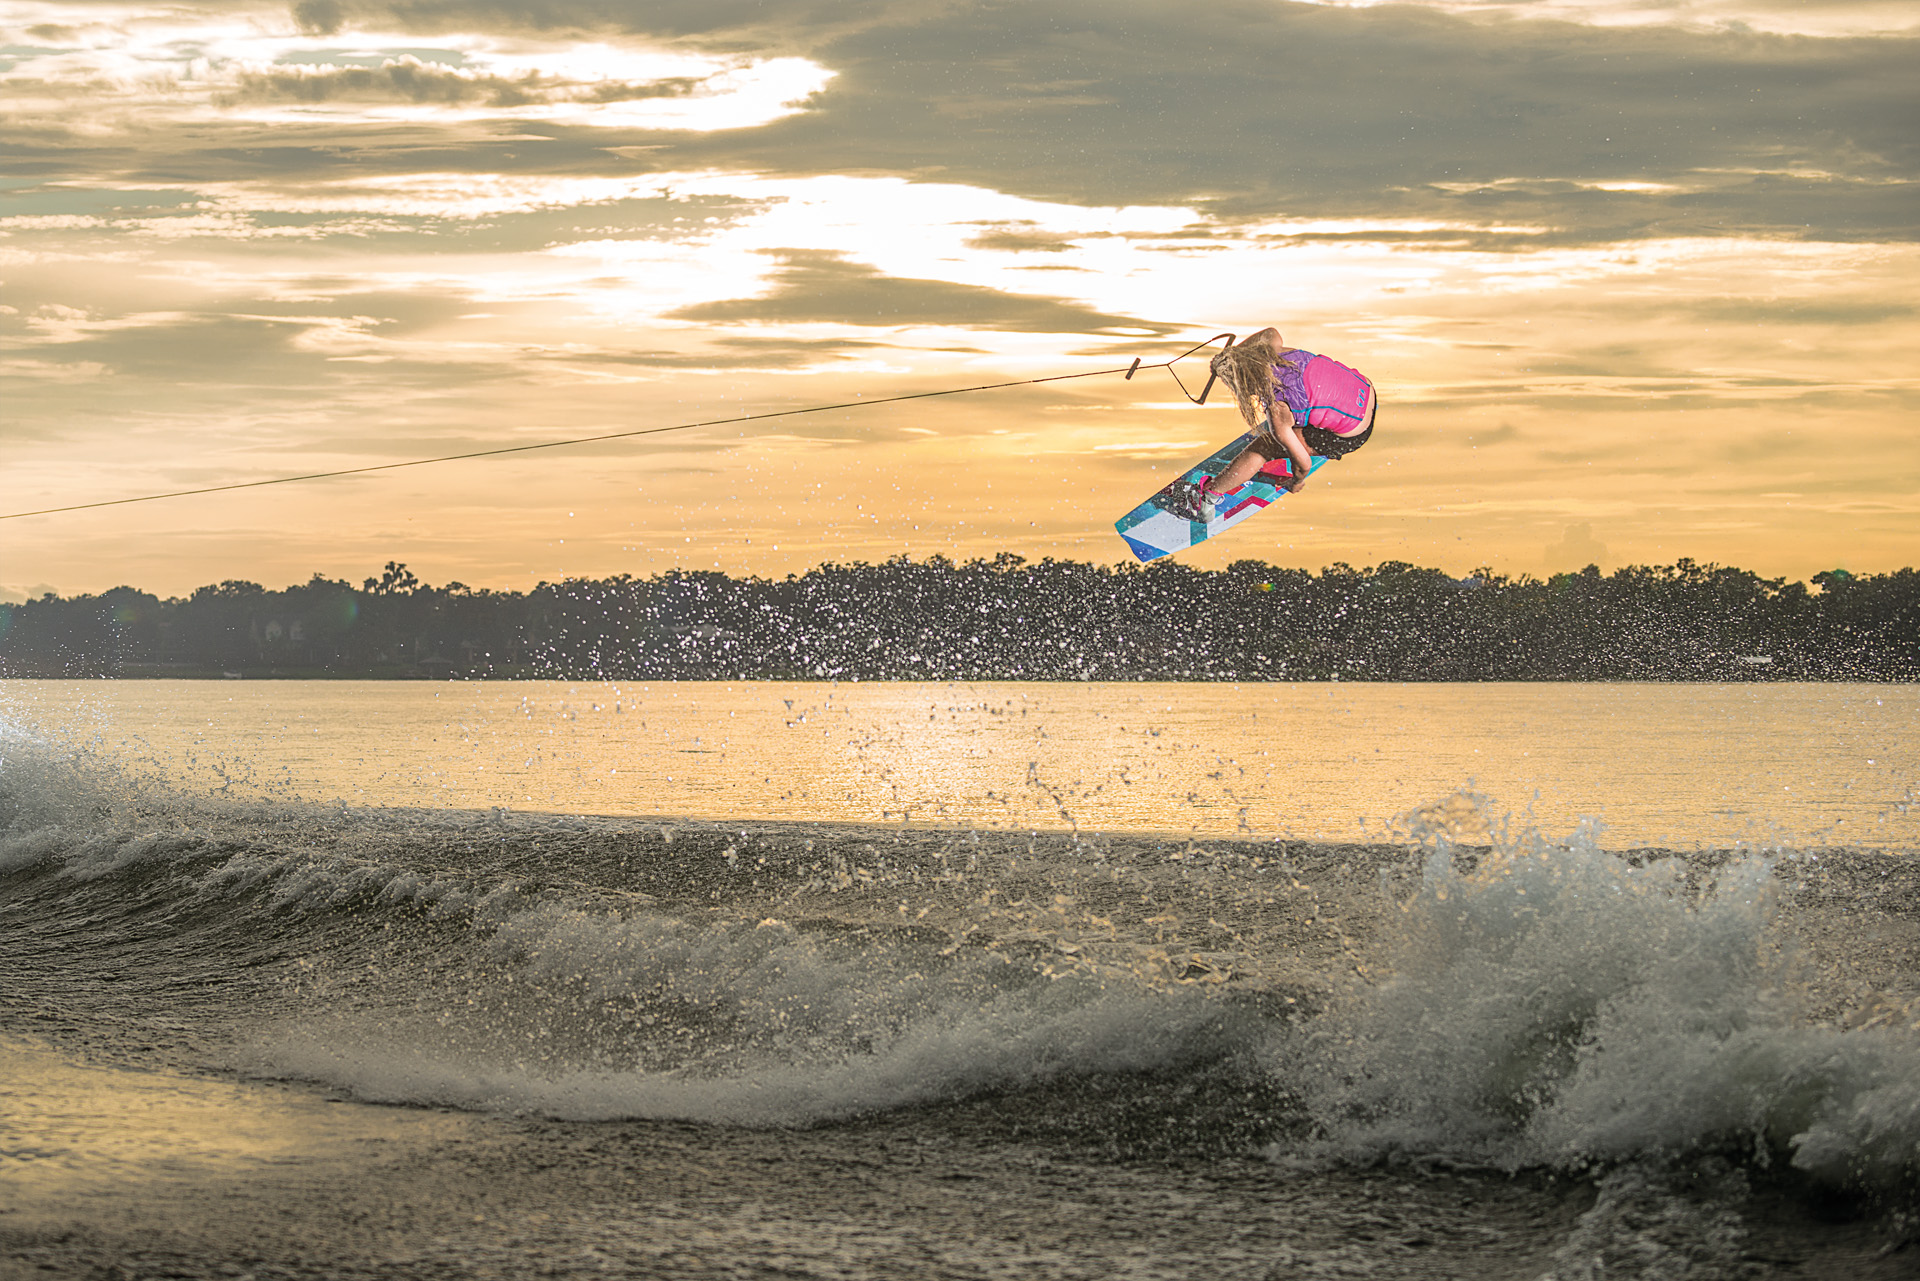 Product highlight: Charm Wakeboard Series